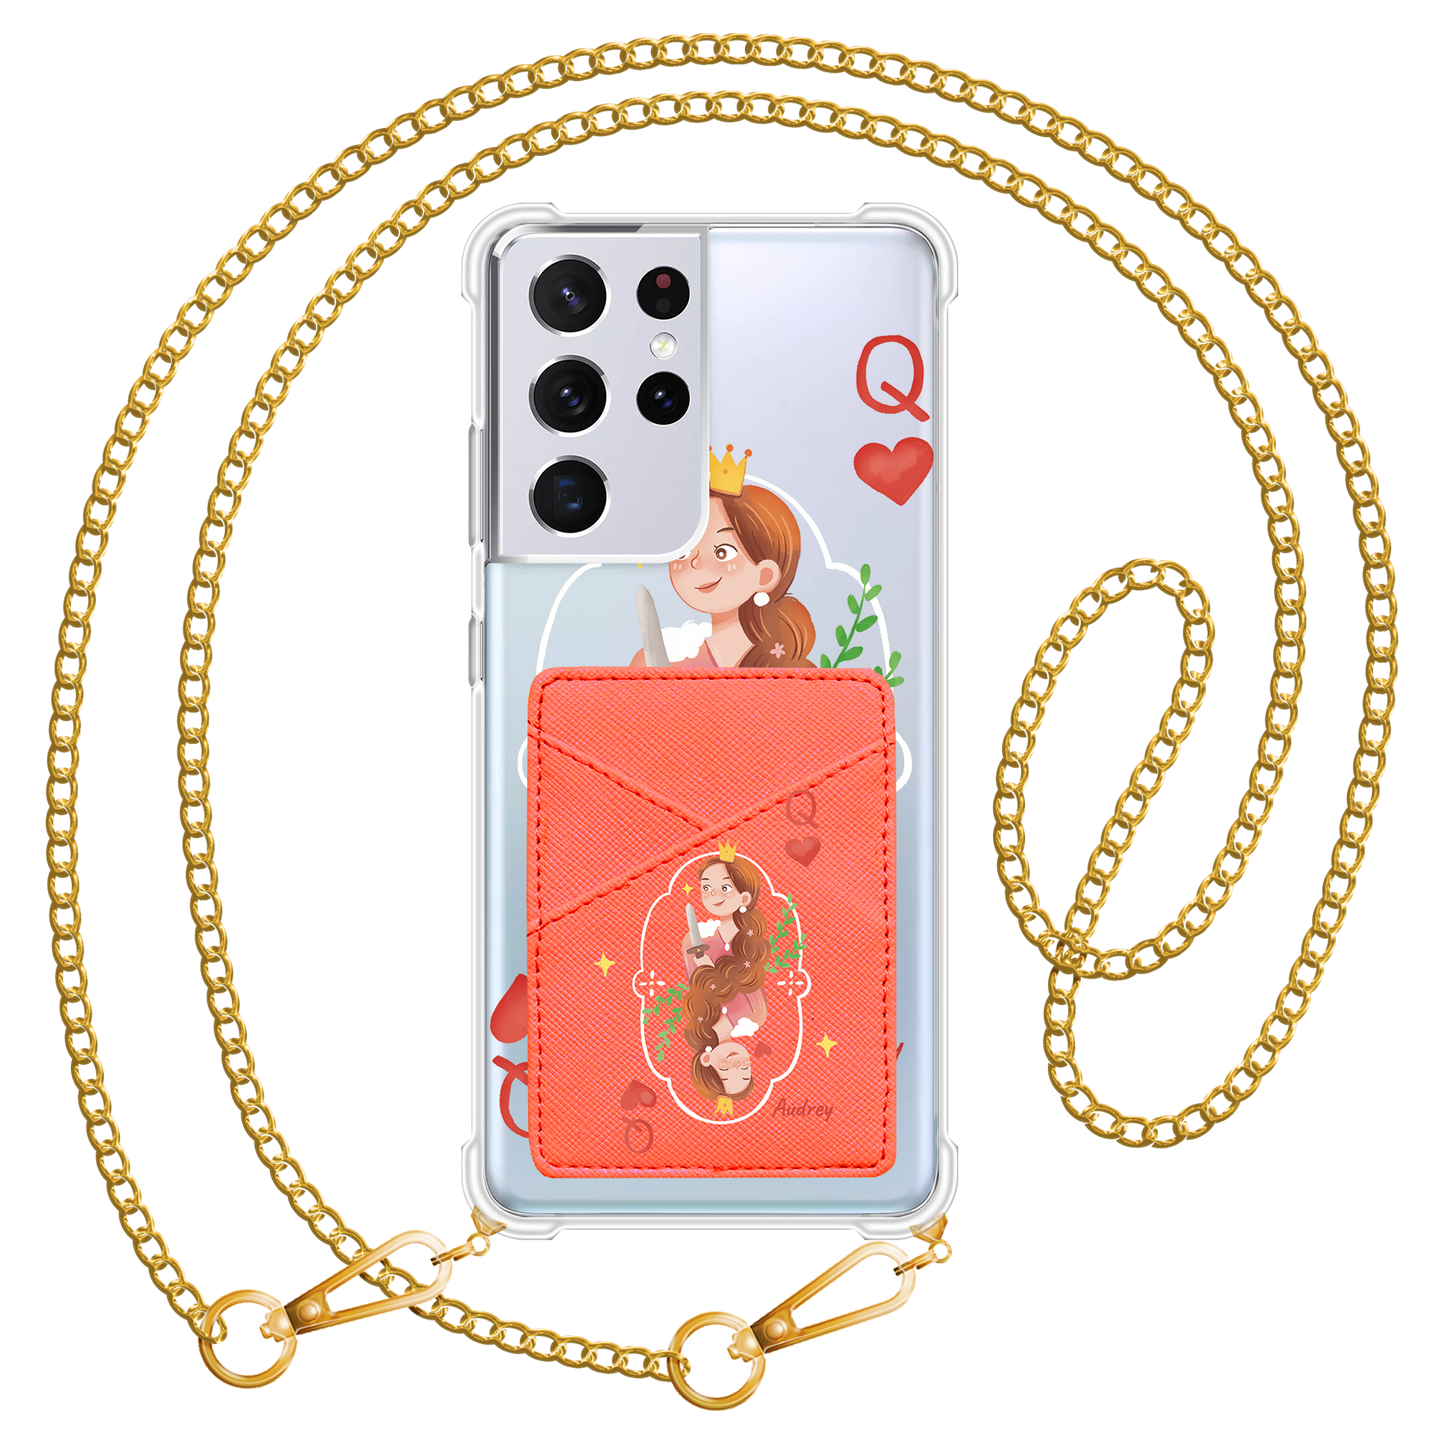 Android Phone Wallet Case - Queen (Couple Case)